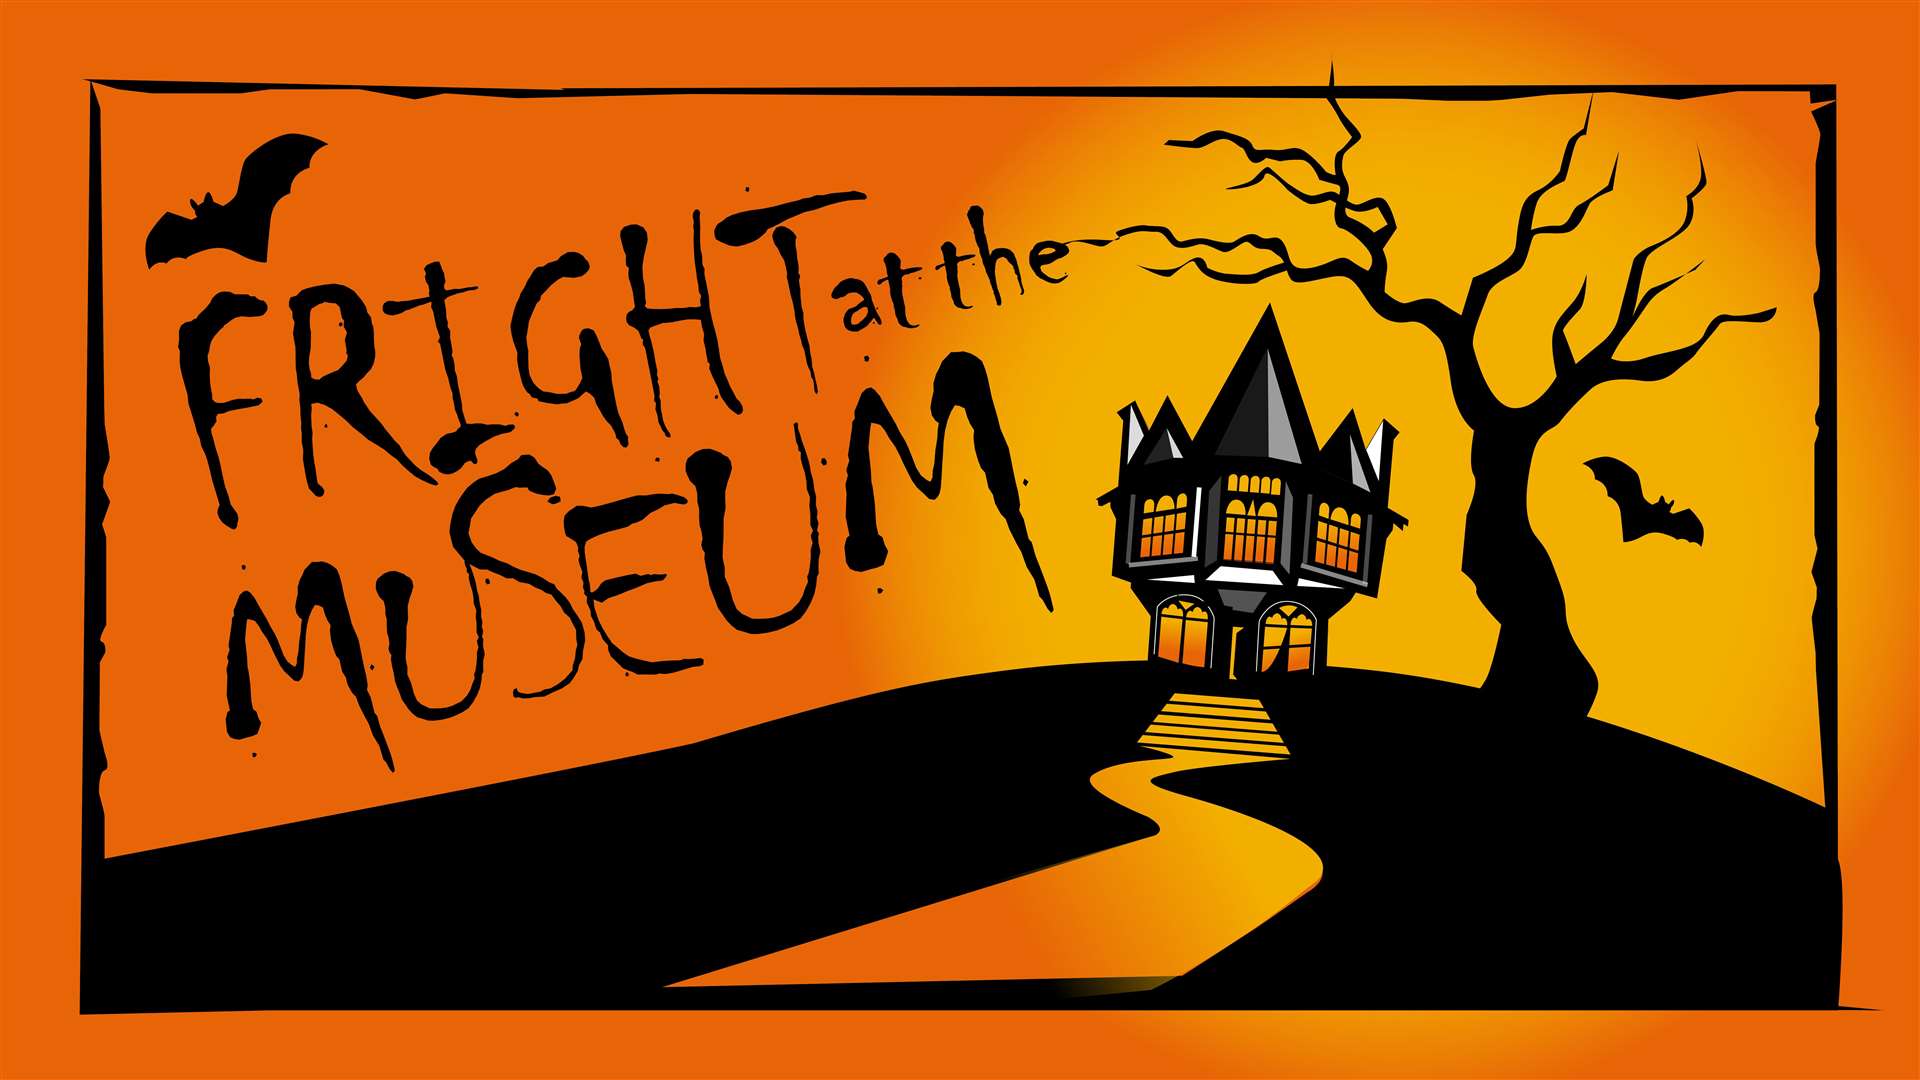 Fright at the Museum